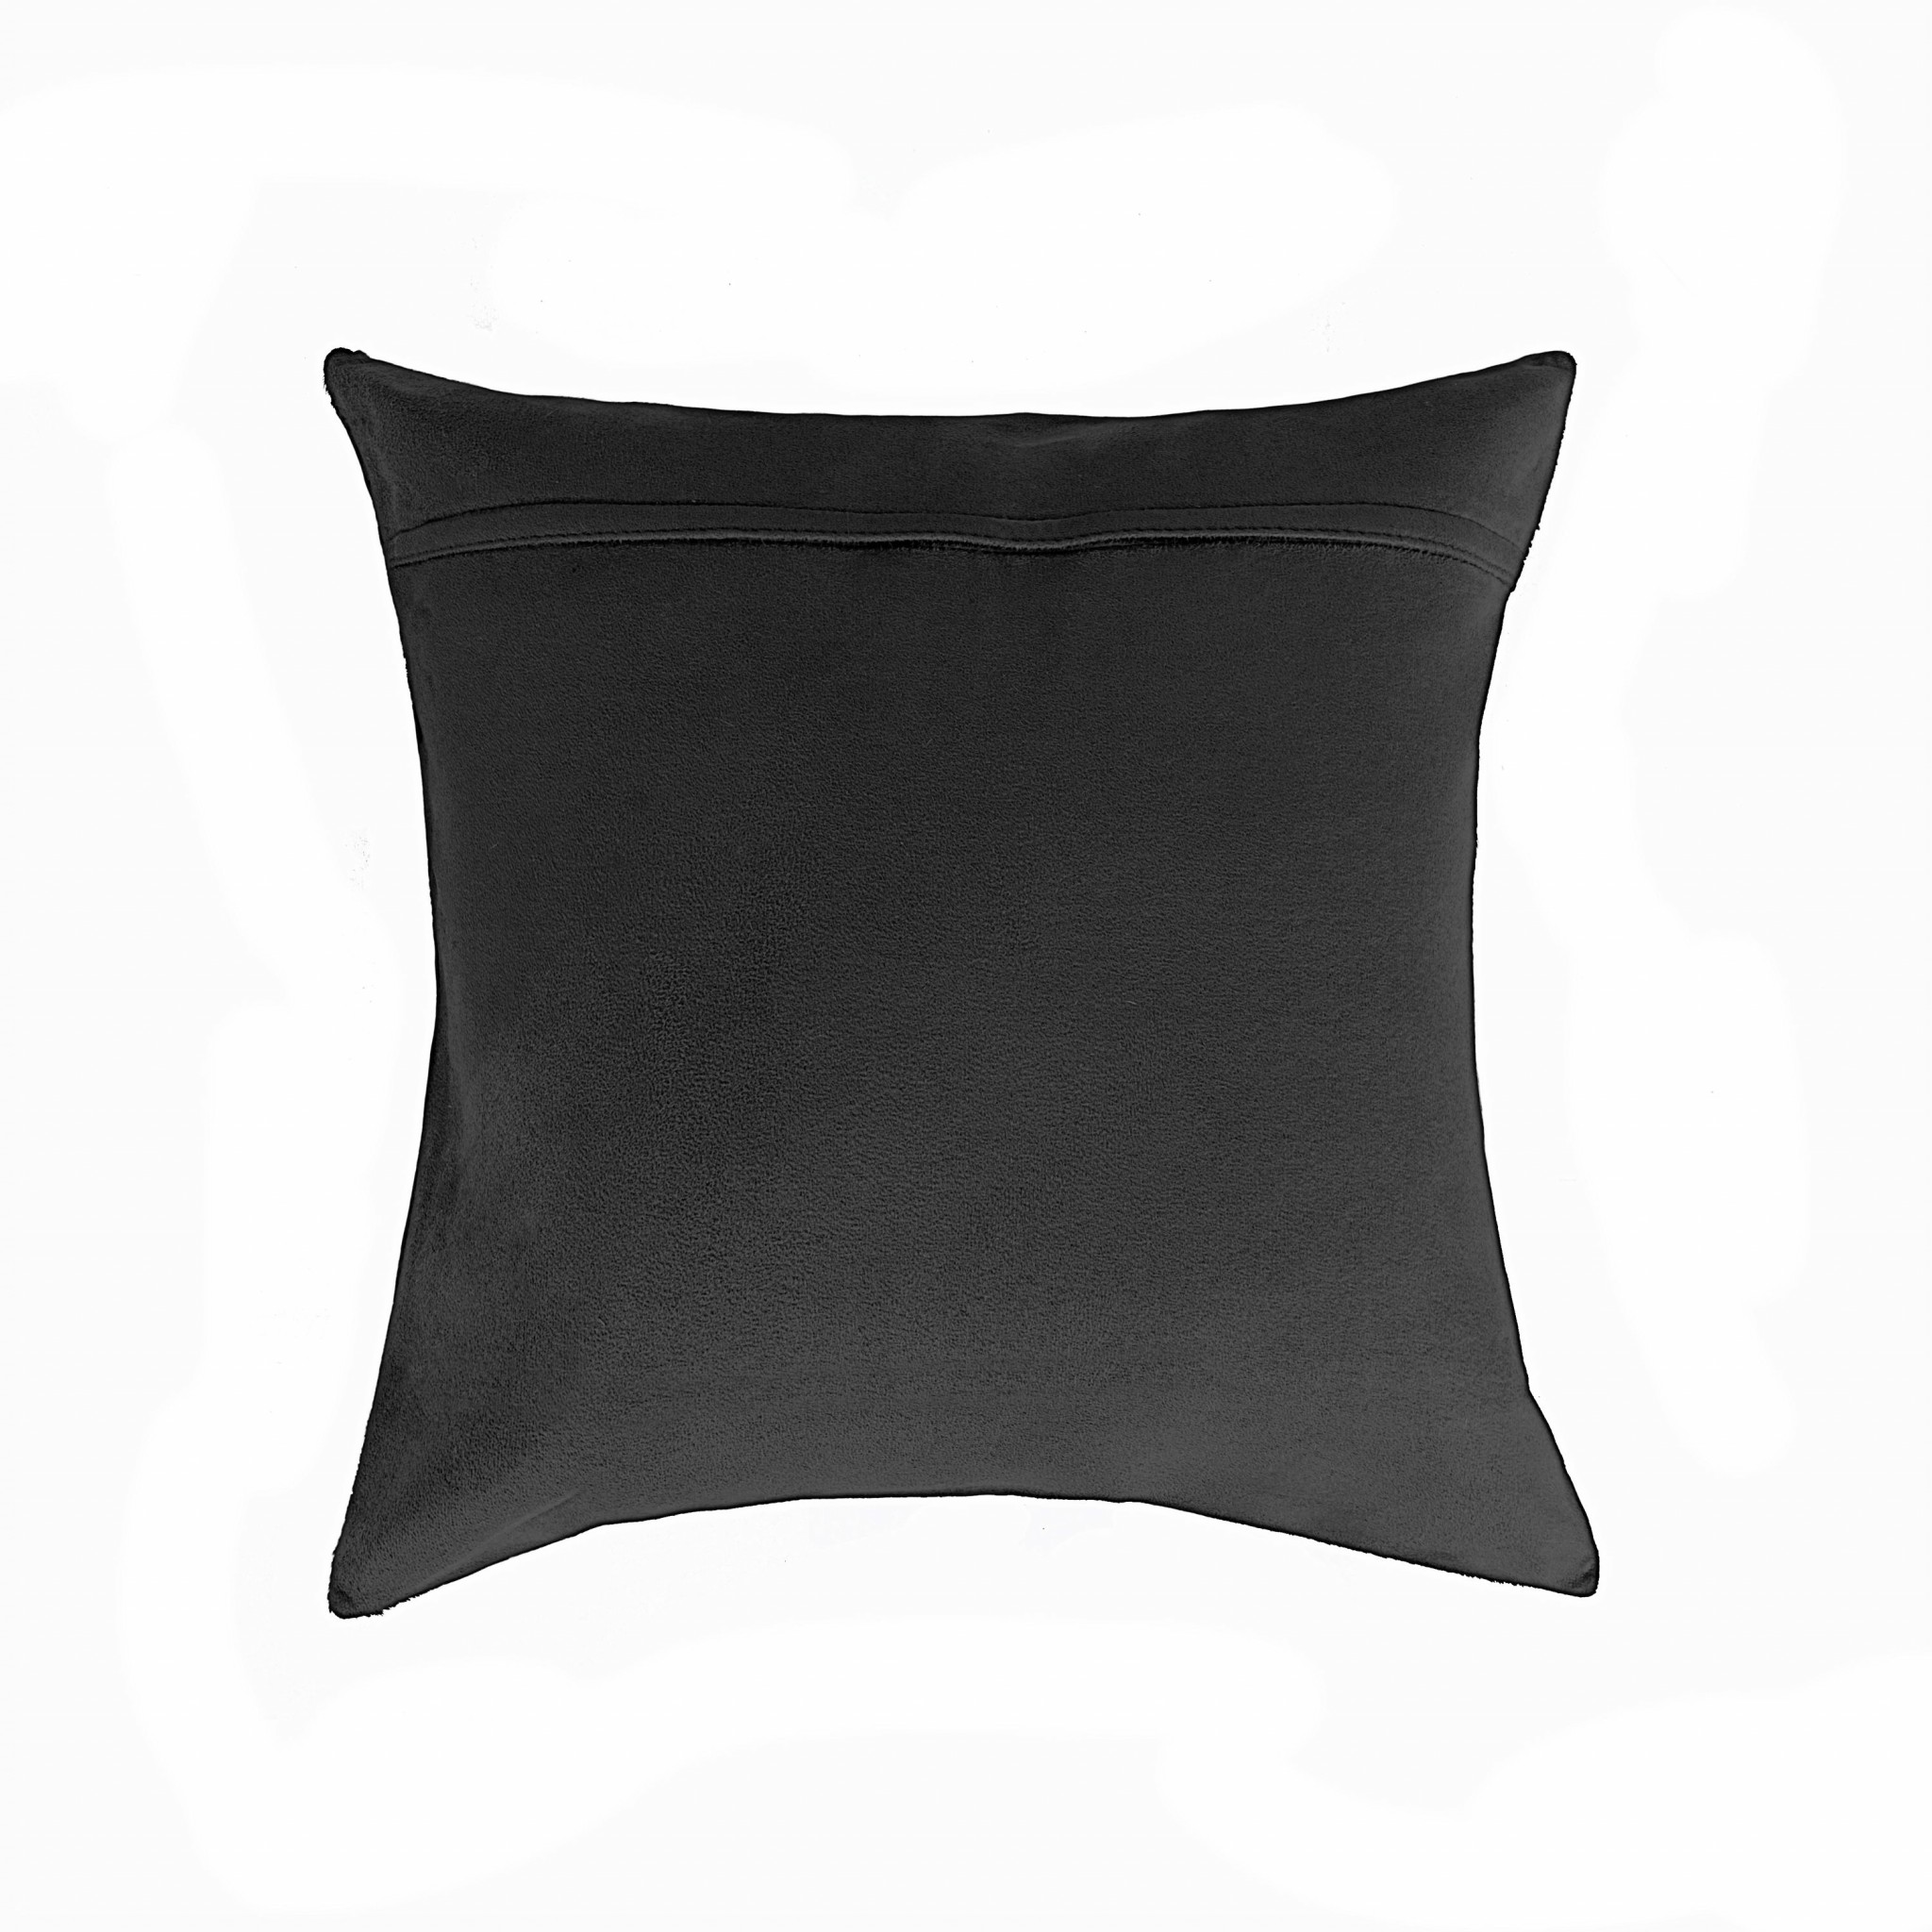 18" x 18" x 5" Black And White Cowhide - Pillow